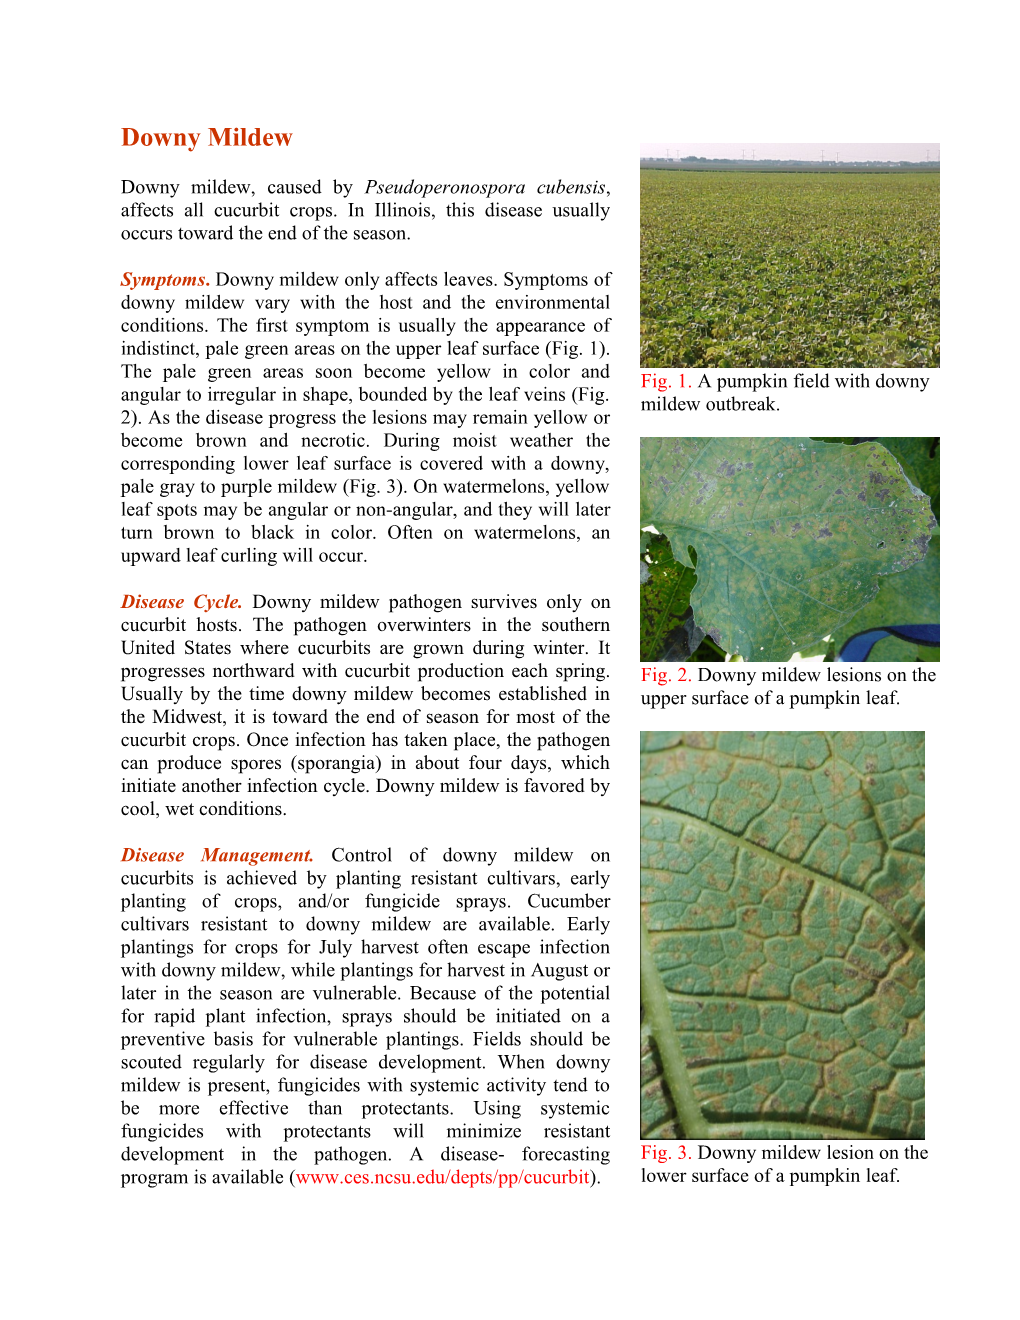 Fig. 1. a Pumpkin Field with Downy Mildew Outbreak